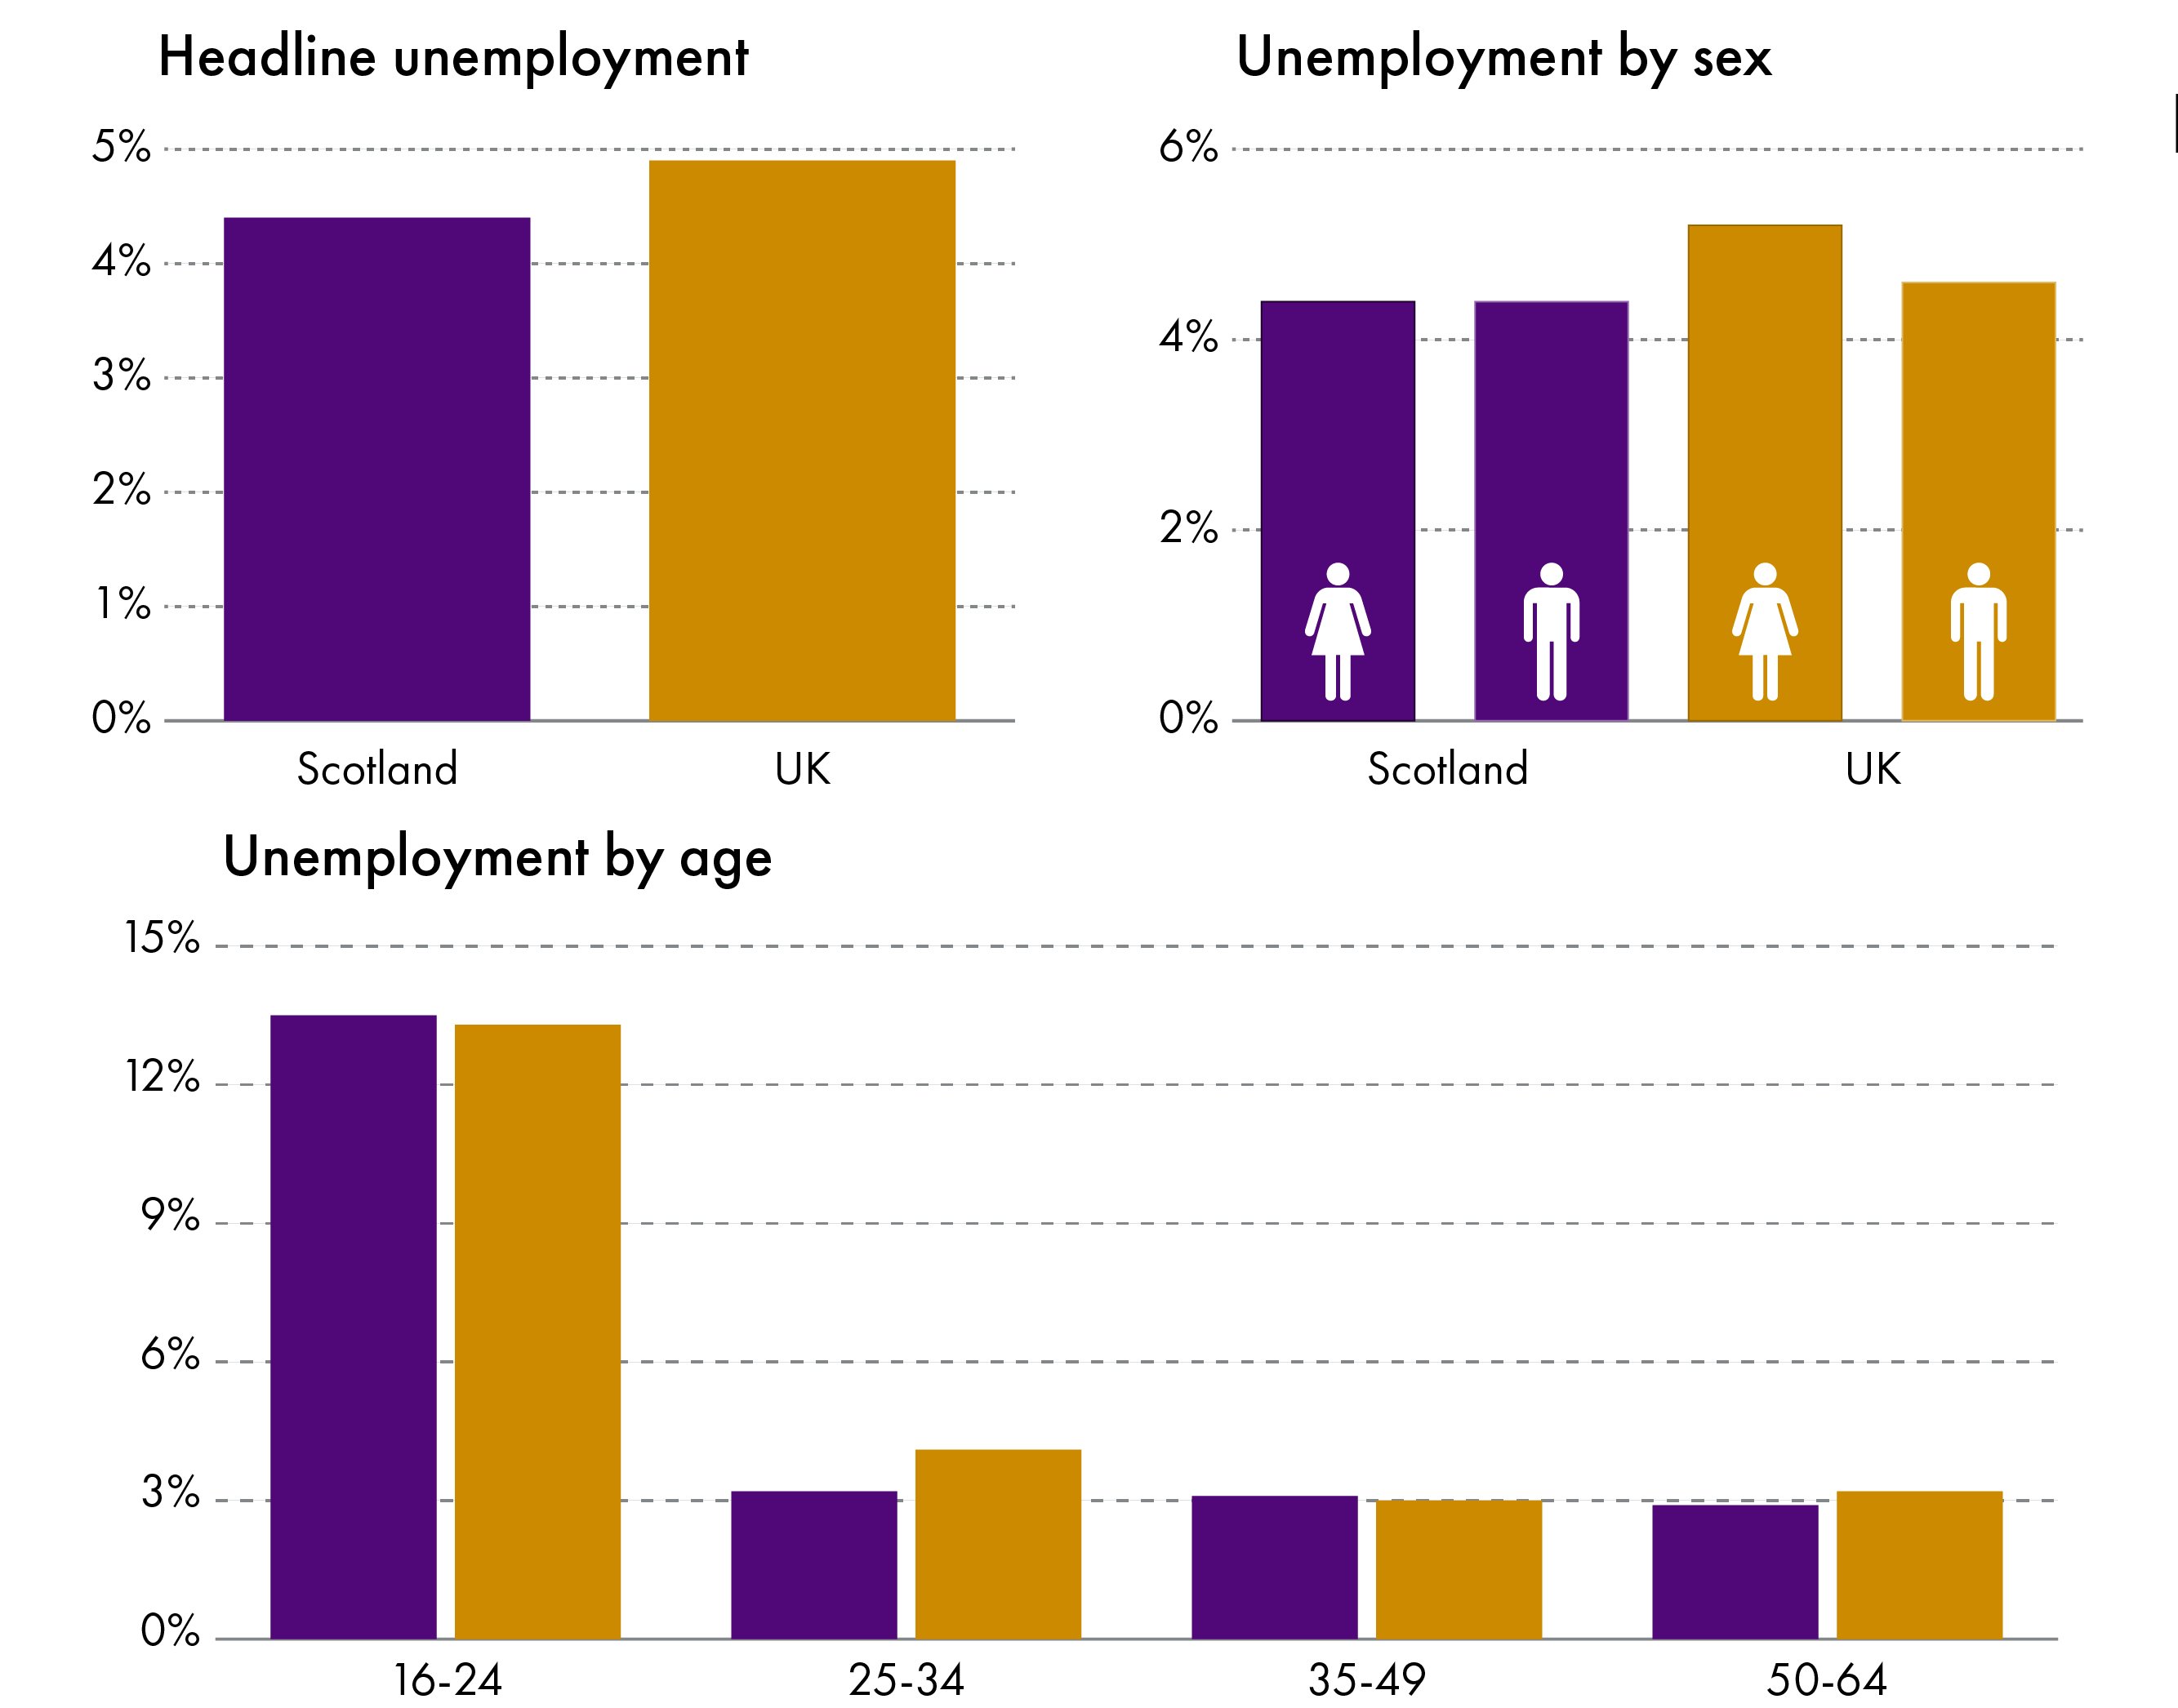 This infographic shows the headline unemployment rates for Scotland and the UK, as well as some of the segments. The female unemployment rate has risen slightly more than the mail rate in the year leading to February 2021, while the unemployment rate for those aged 16-24 has risen far more than any other age group.  